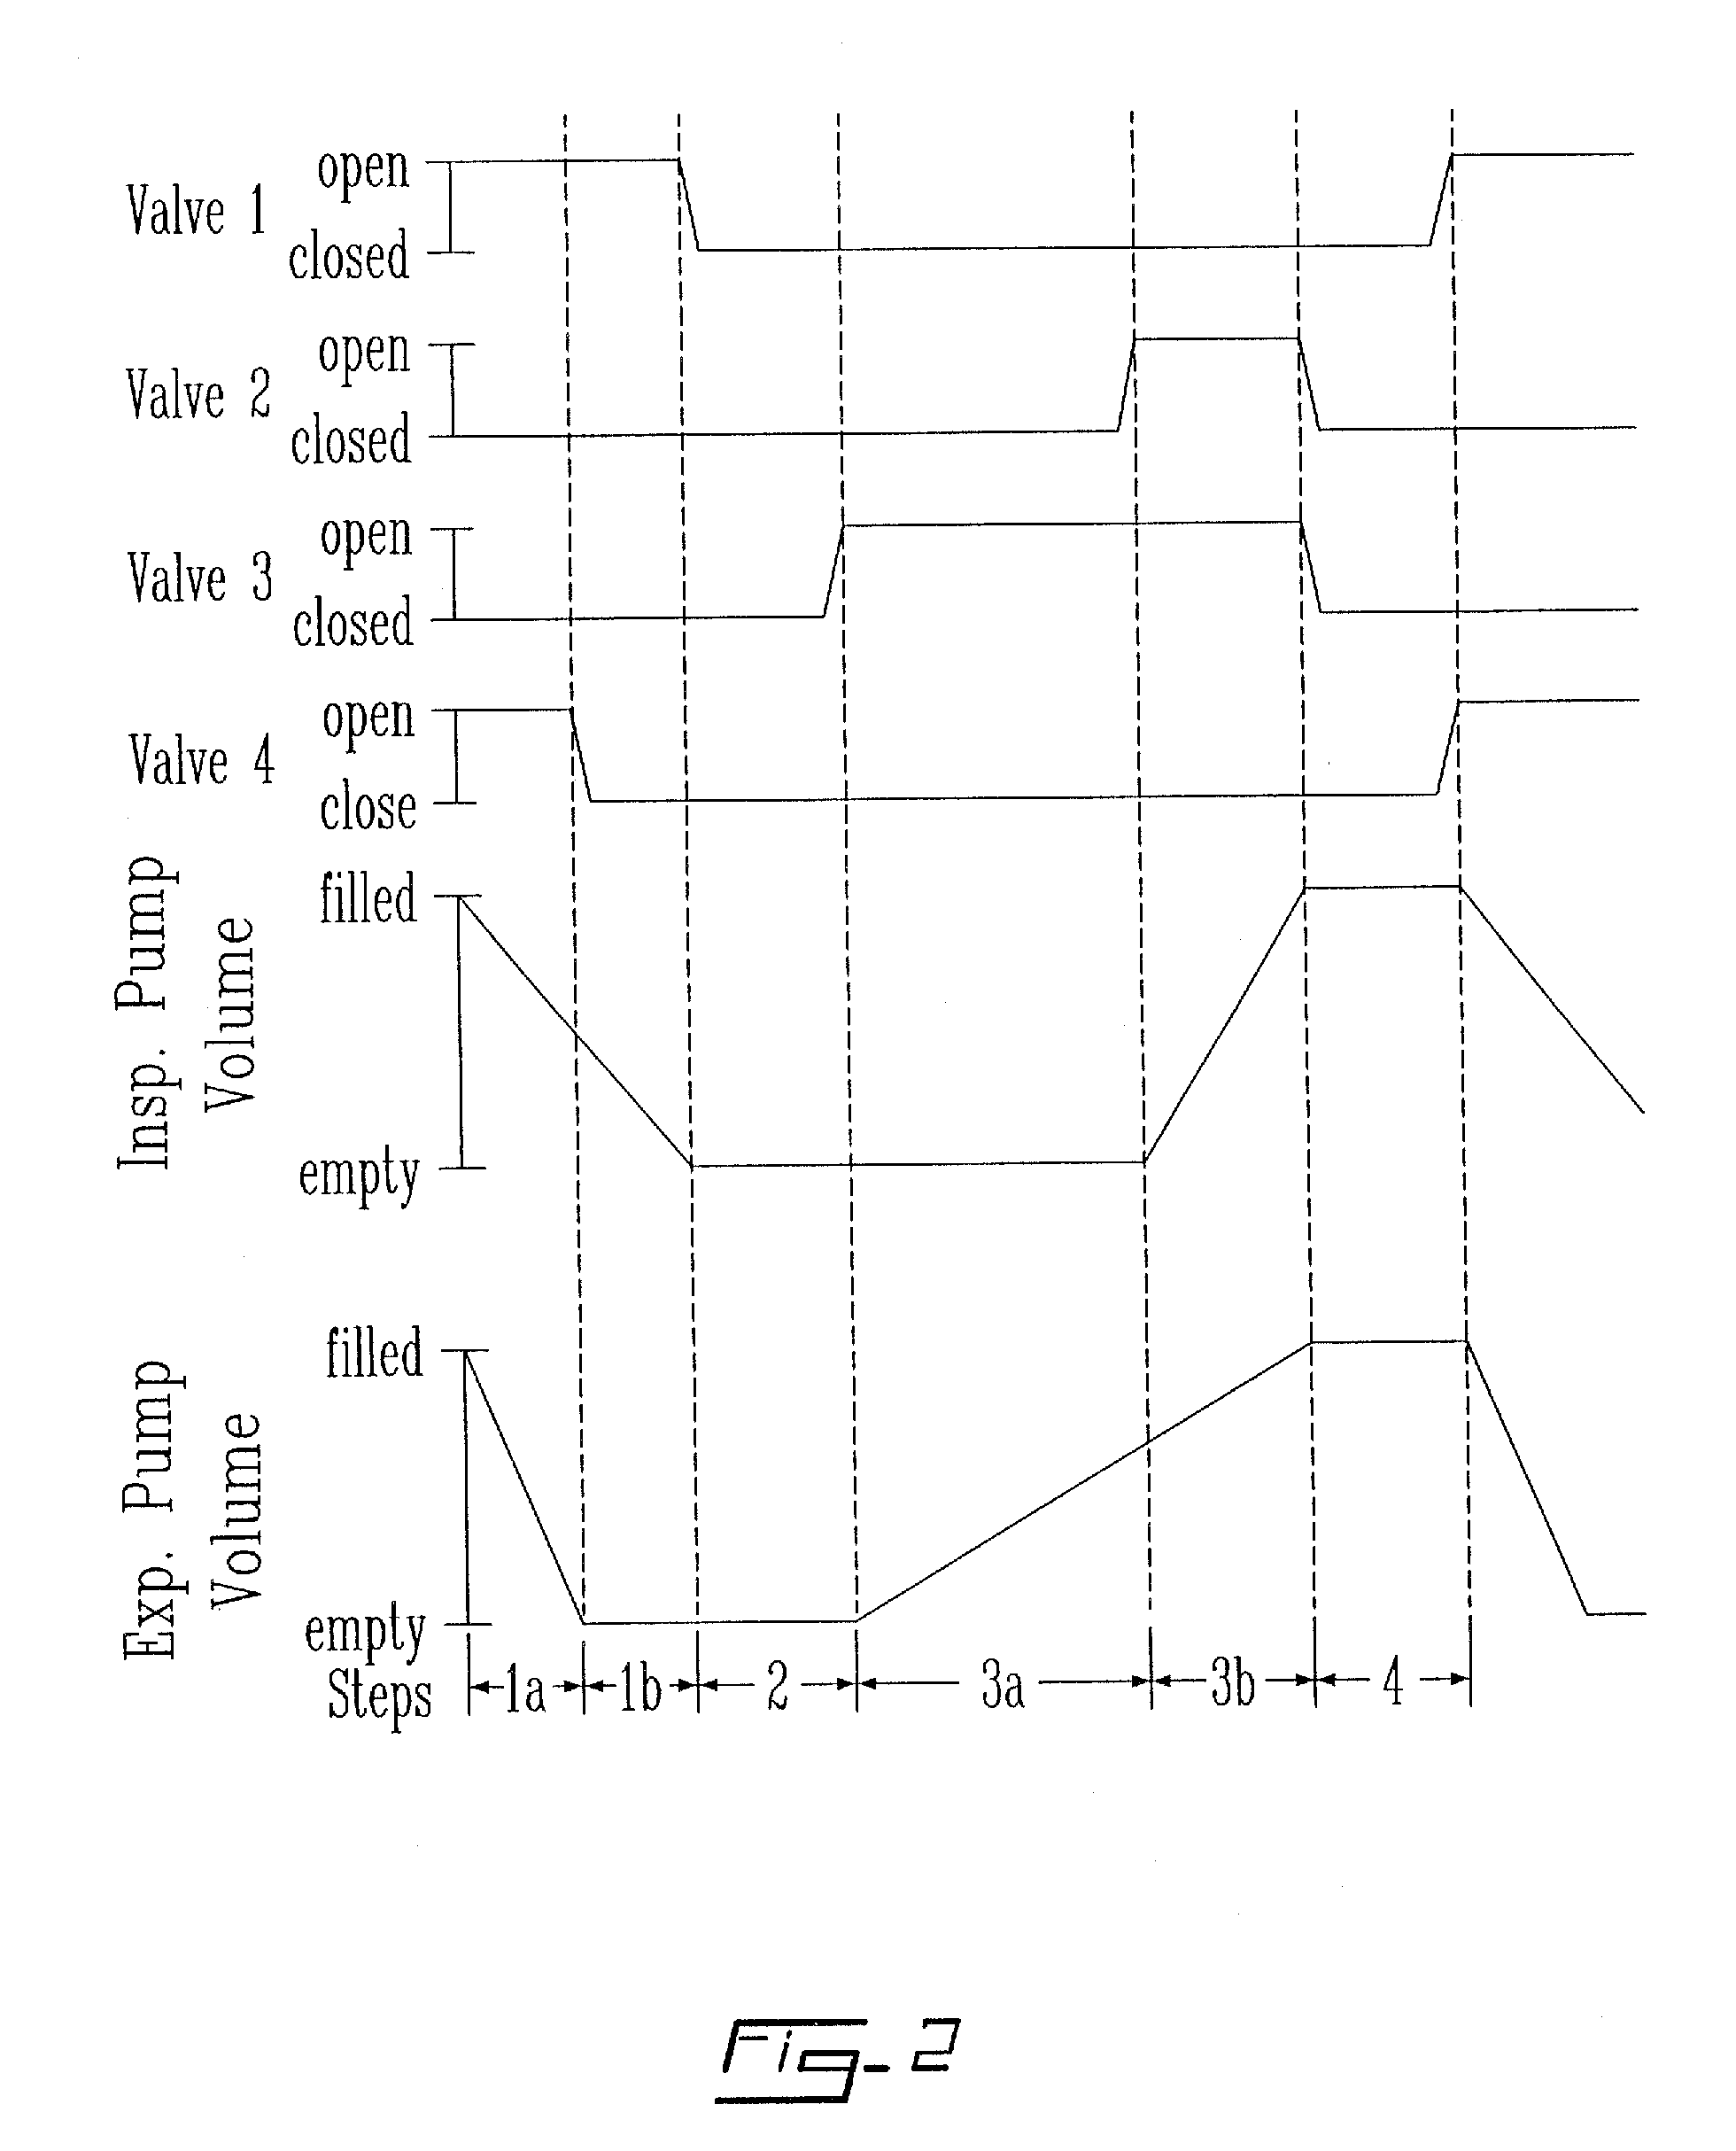 Method and apparatus for conducting total liquid ventilation with control of residual volume and ventilation cycle profile